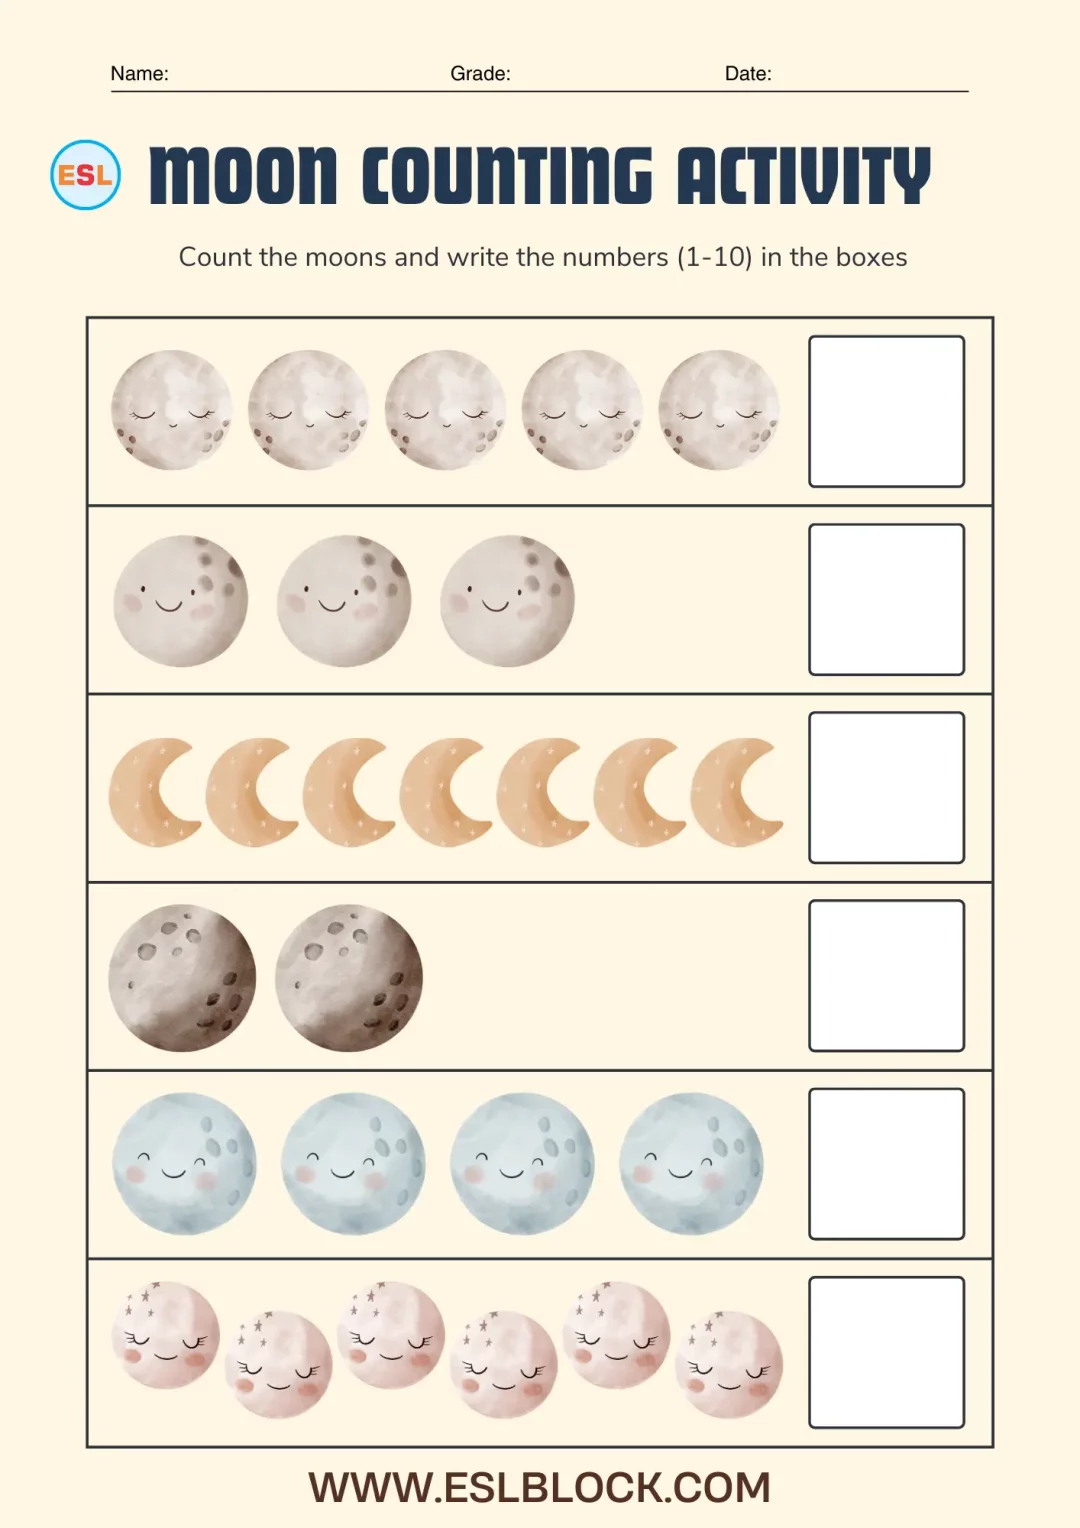 Preschool Earth and Space Science - Math Worksheets 5